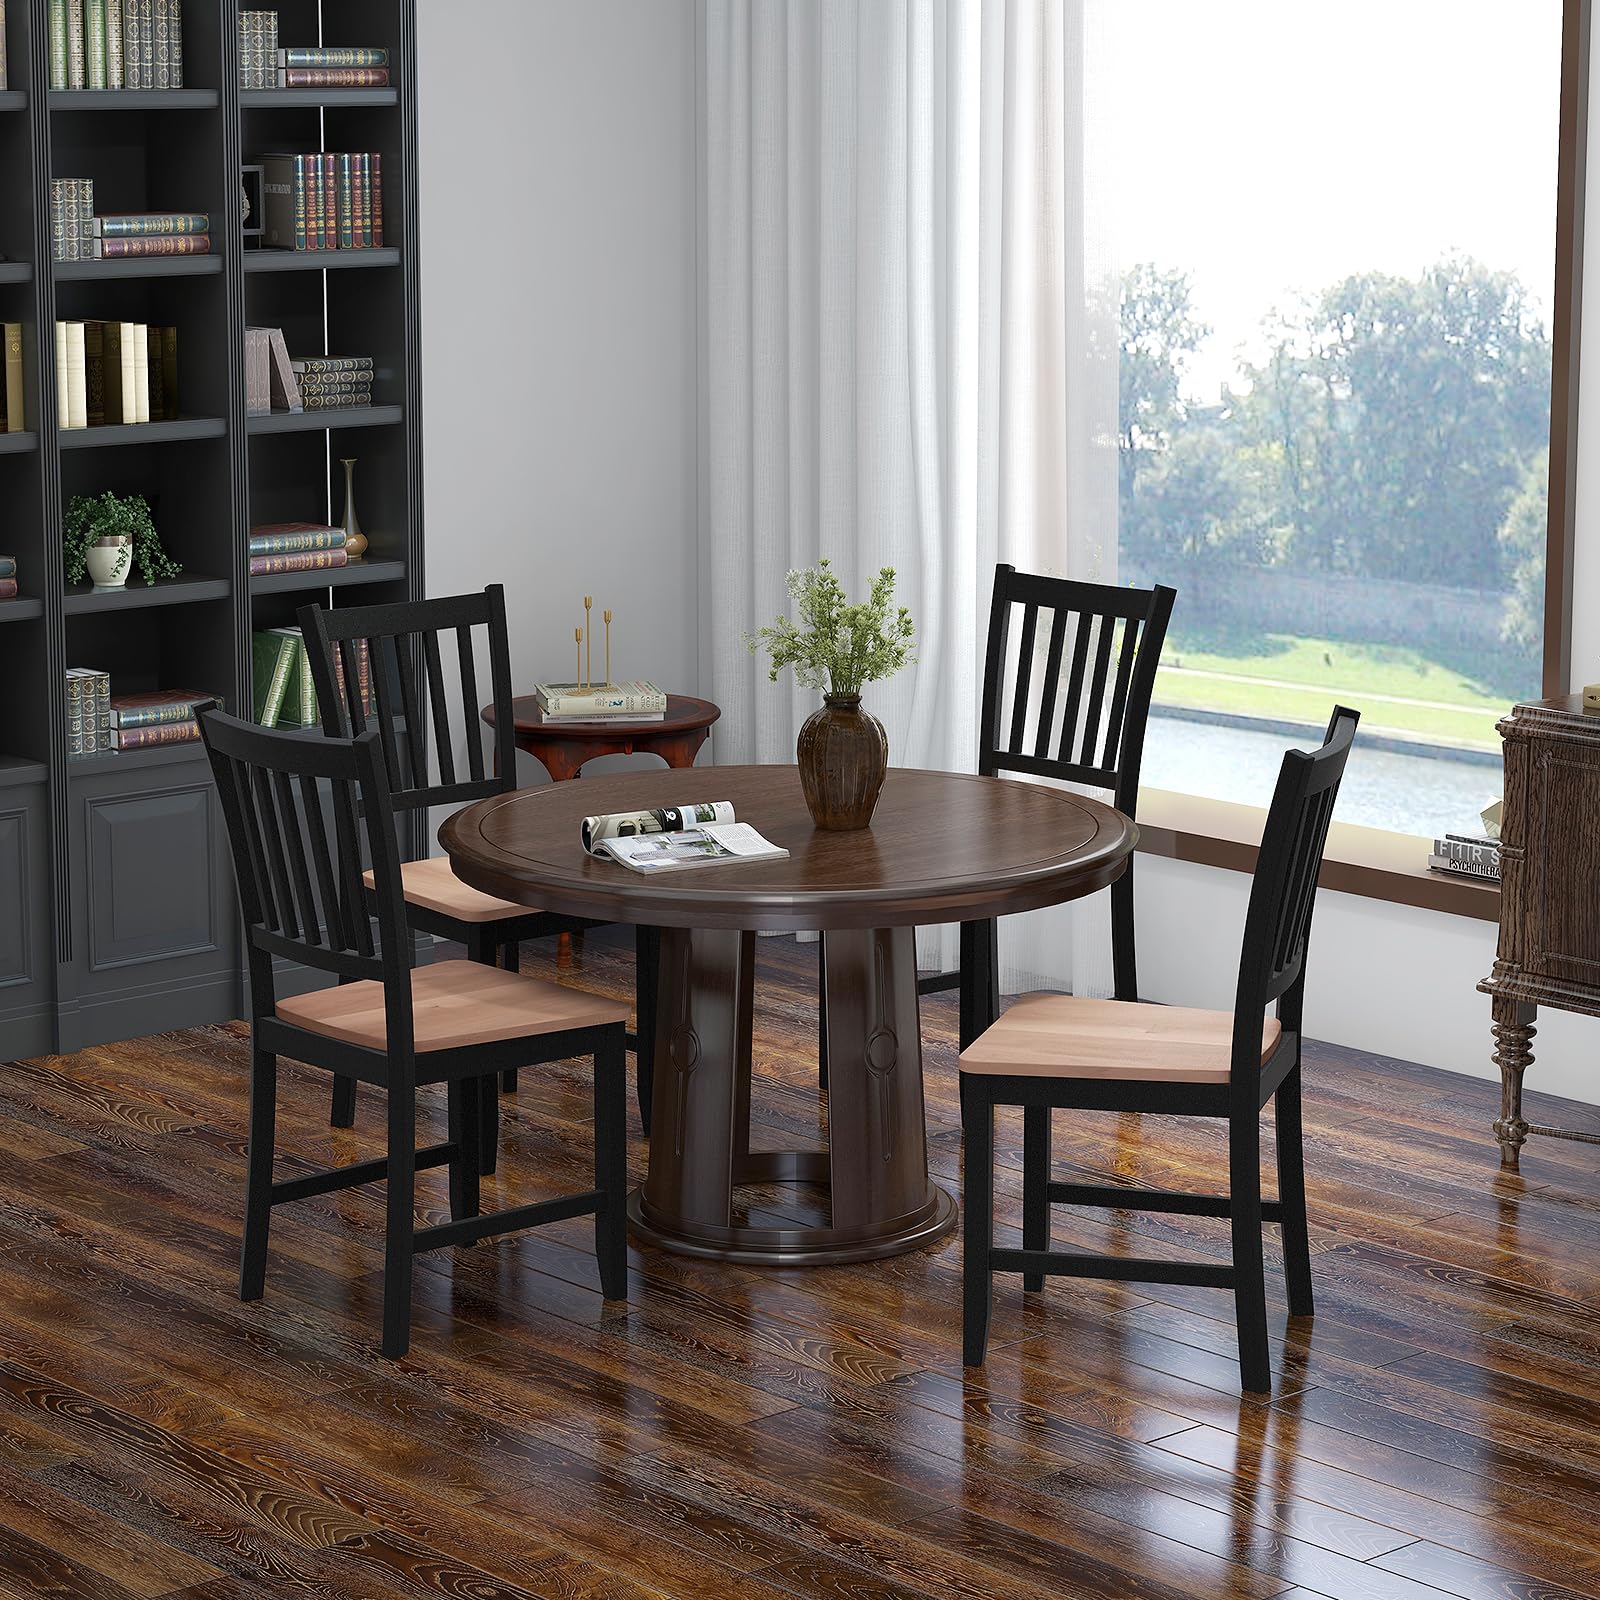 Giantex Wooden Dining Chairs Set of 4, Farmhouse Kitchen Chair with Rubber Wood Legs